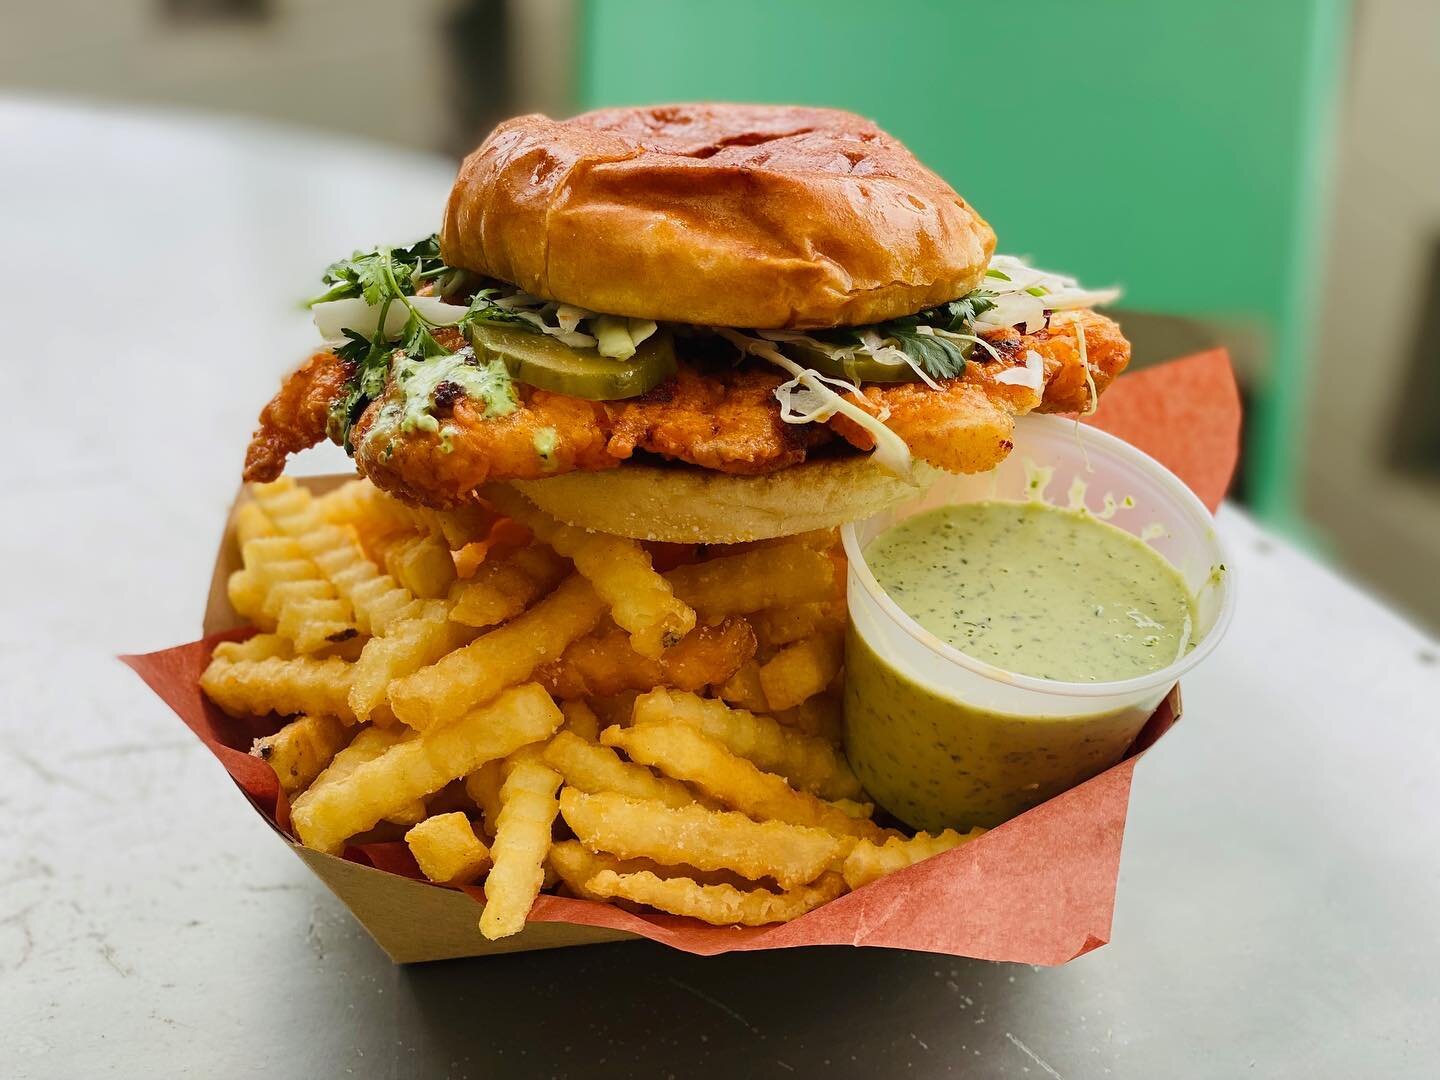 #LambWestonAmbassador
I am such a texture junkie, which is why my crispy, spicy &ldquo;macho&rdquo; chicken sandwich and @lambweston4chefs crinkle cut fries are the perfect pairing! This sando is spiked with salsa matcha, cilantro and cabbage. The fr